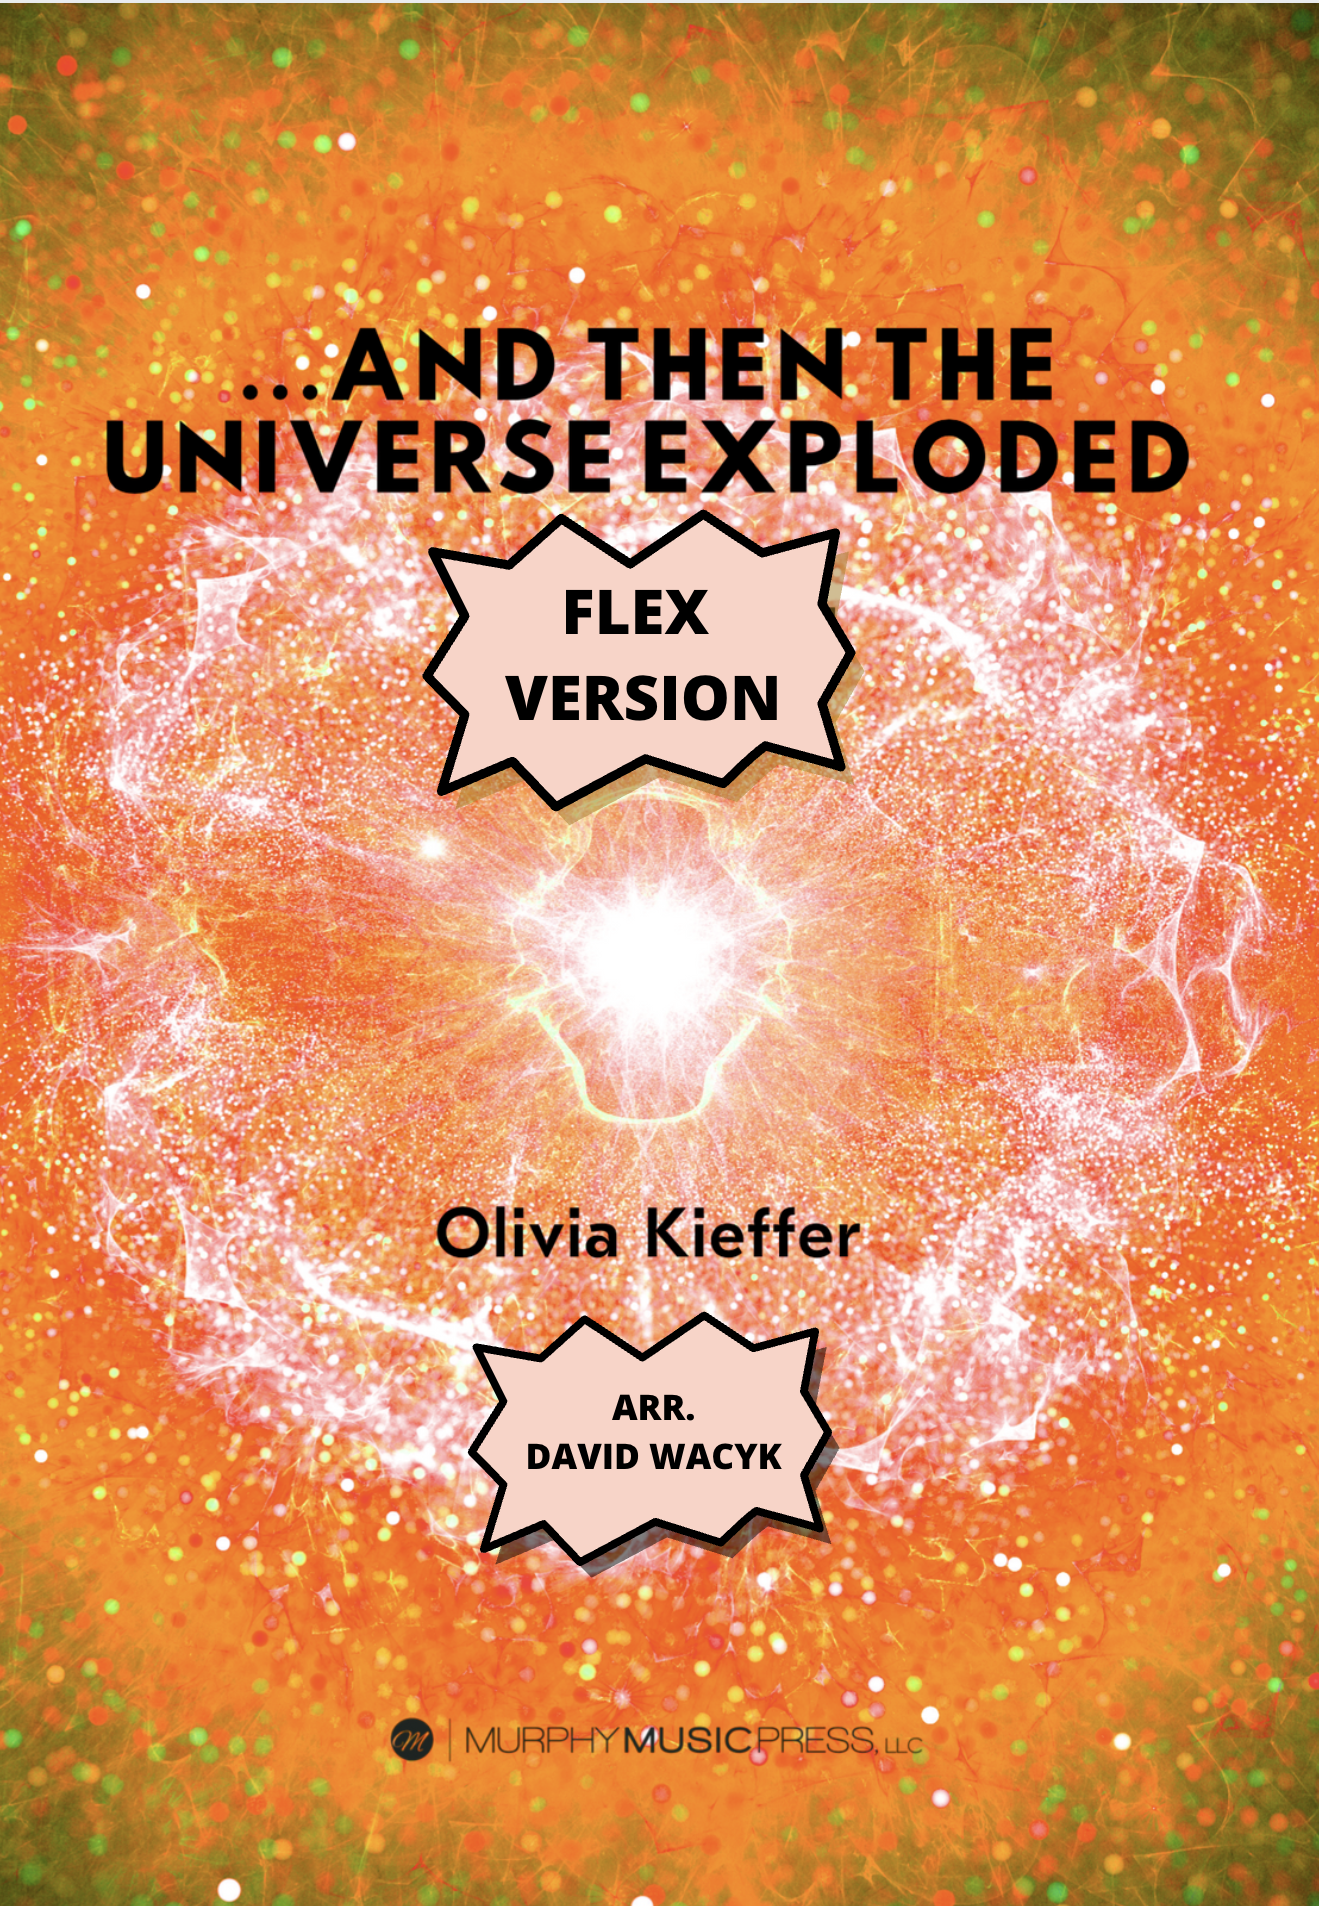 ...And Then The Universe Exploded (Flex Version) by Olivia Kieffer